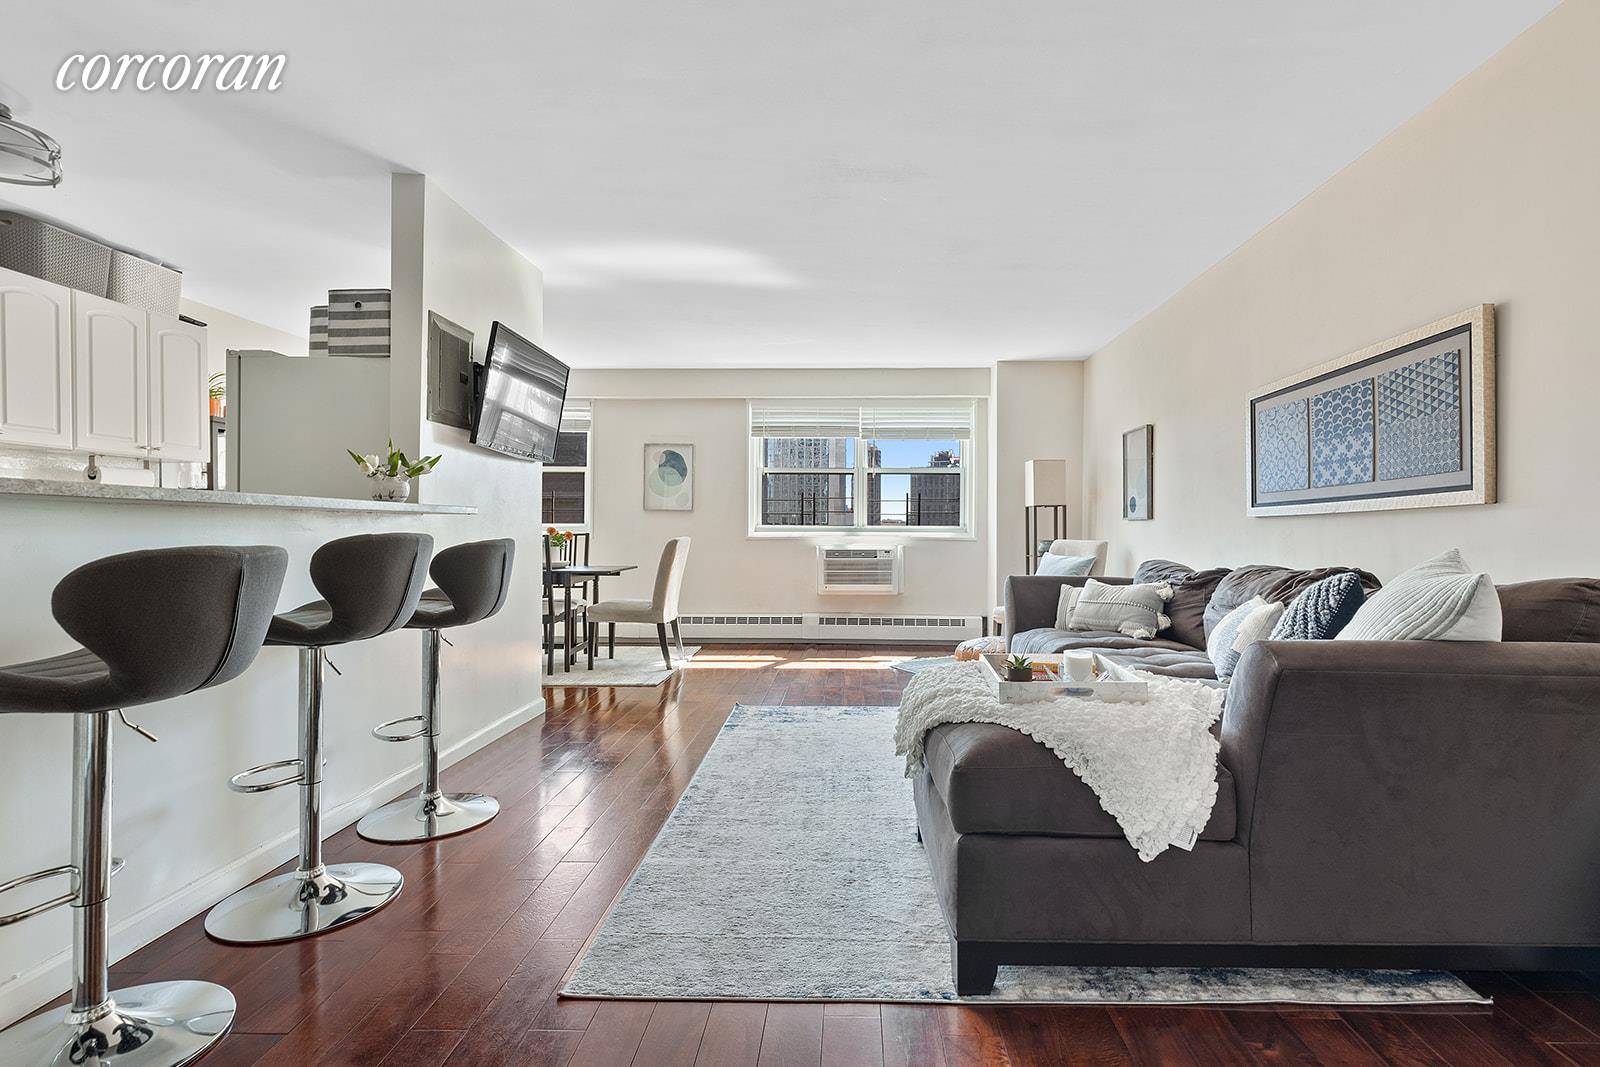 Space to live at an affordable price in the middle of all the amenities of Fort Greene and Downtown Brooklyn.